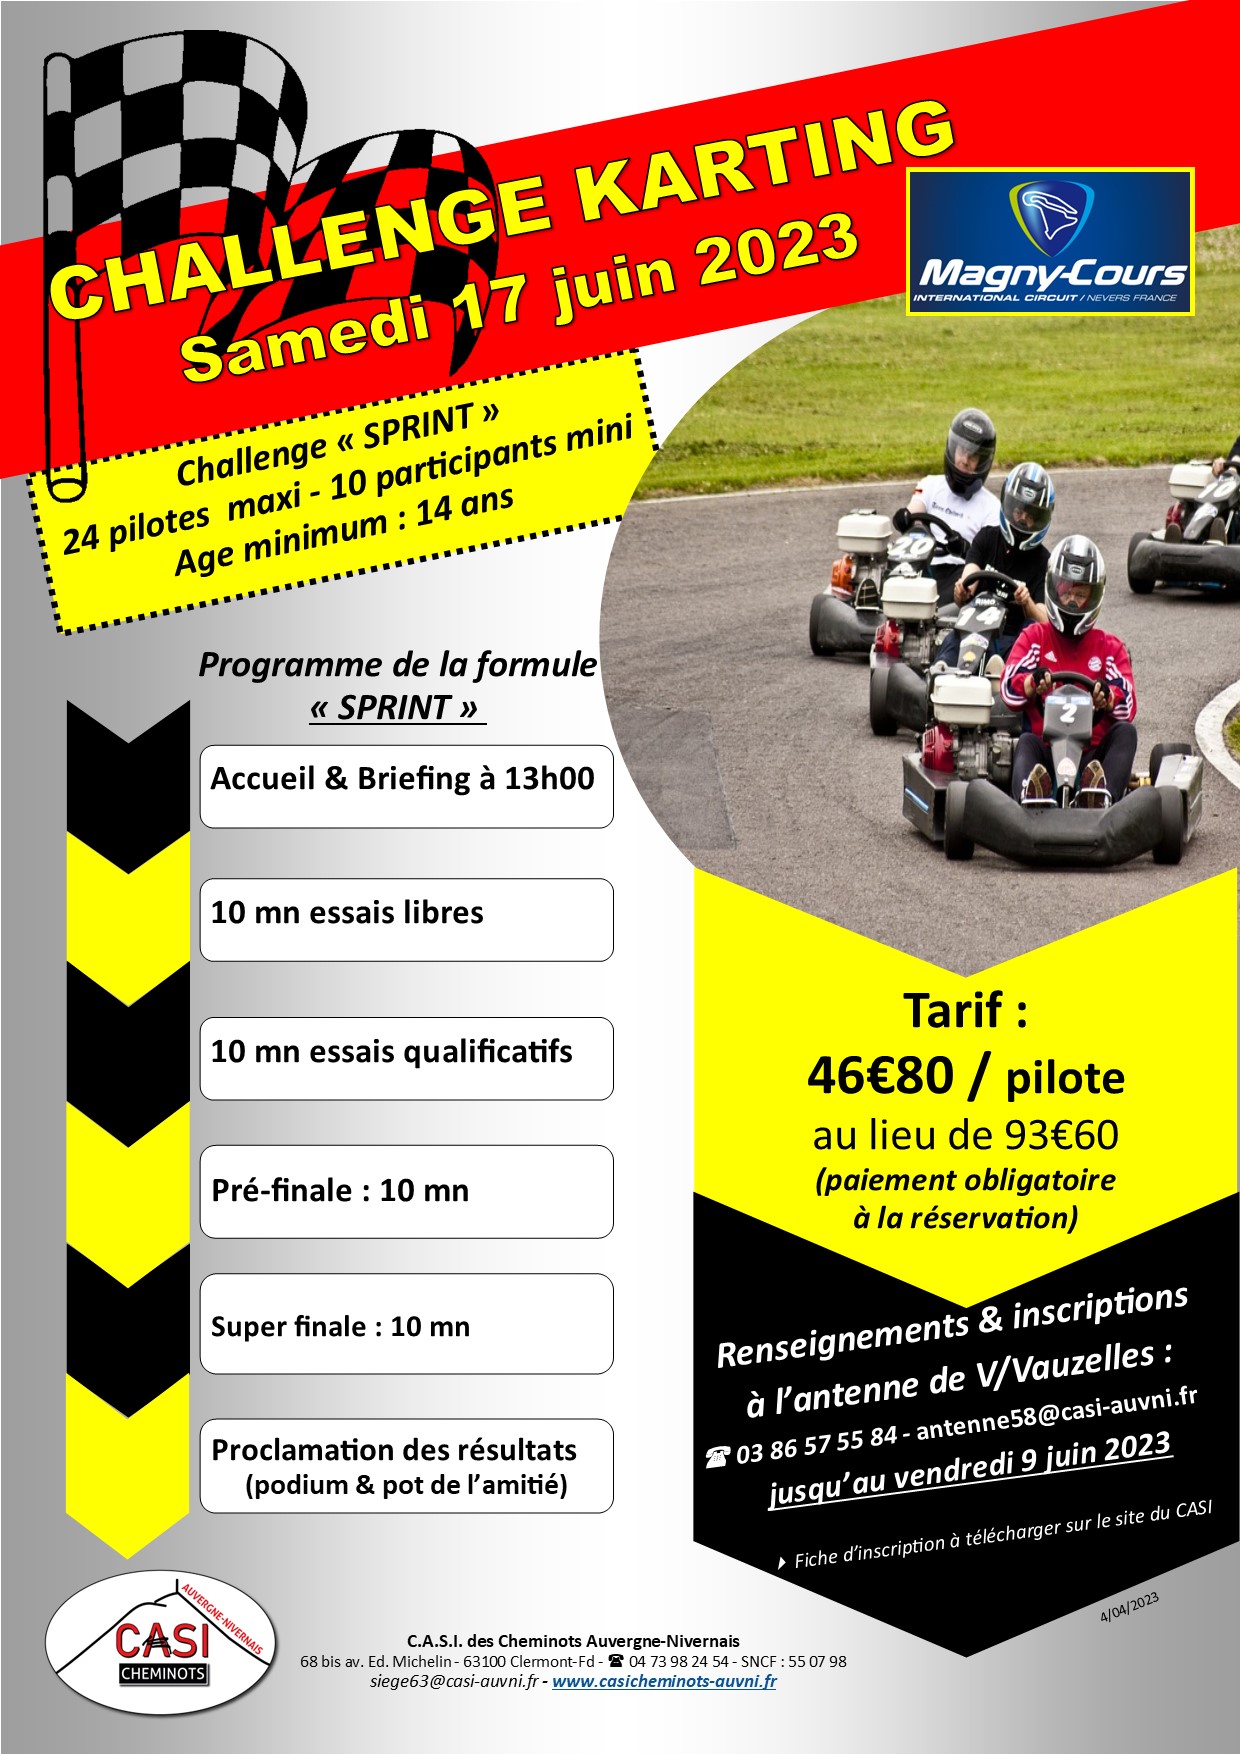 2023 challenge karting Magny Cours